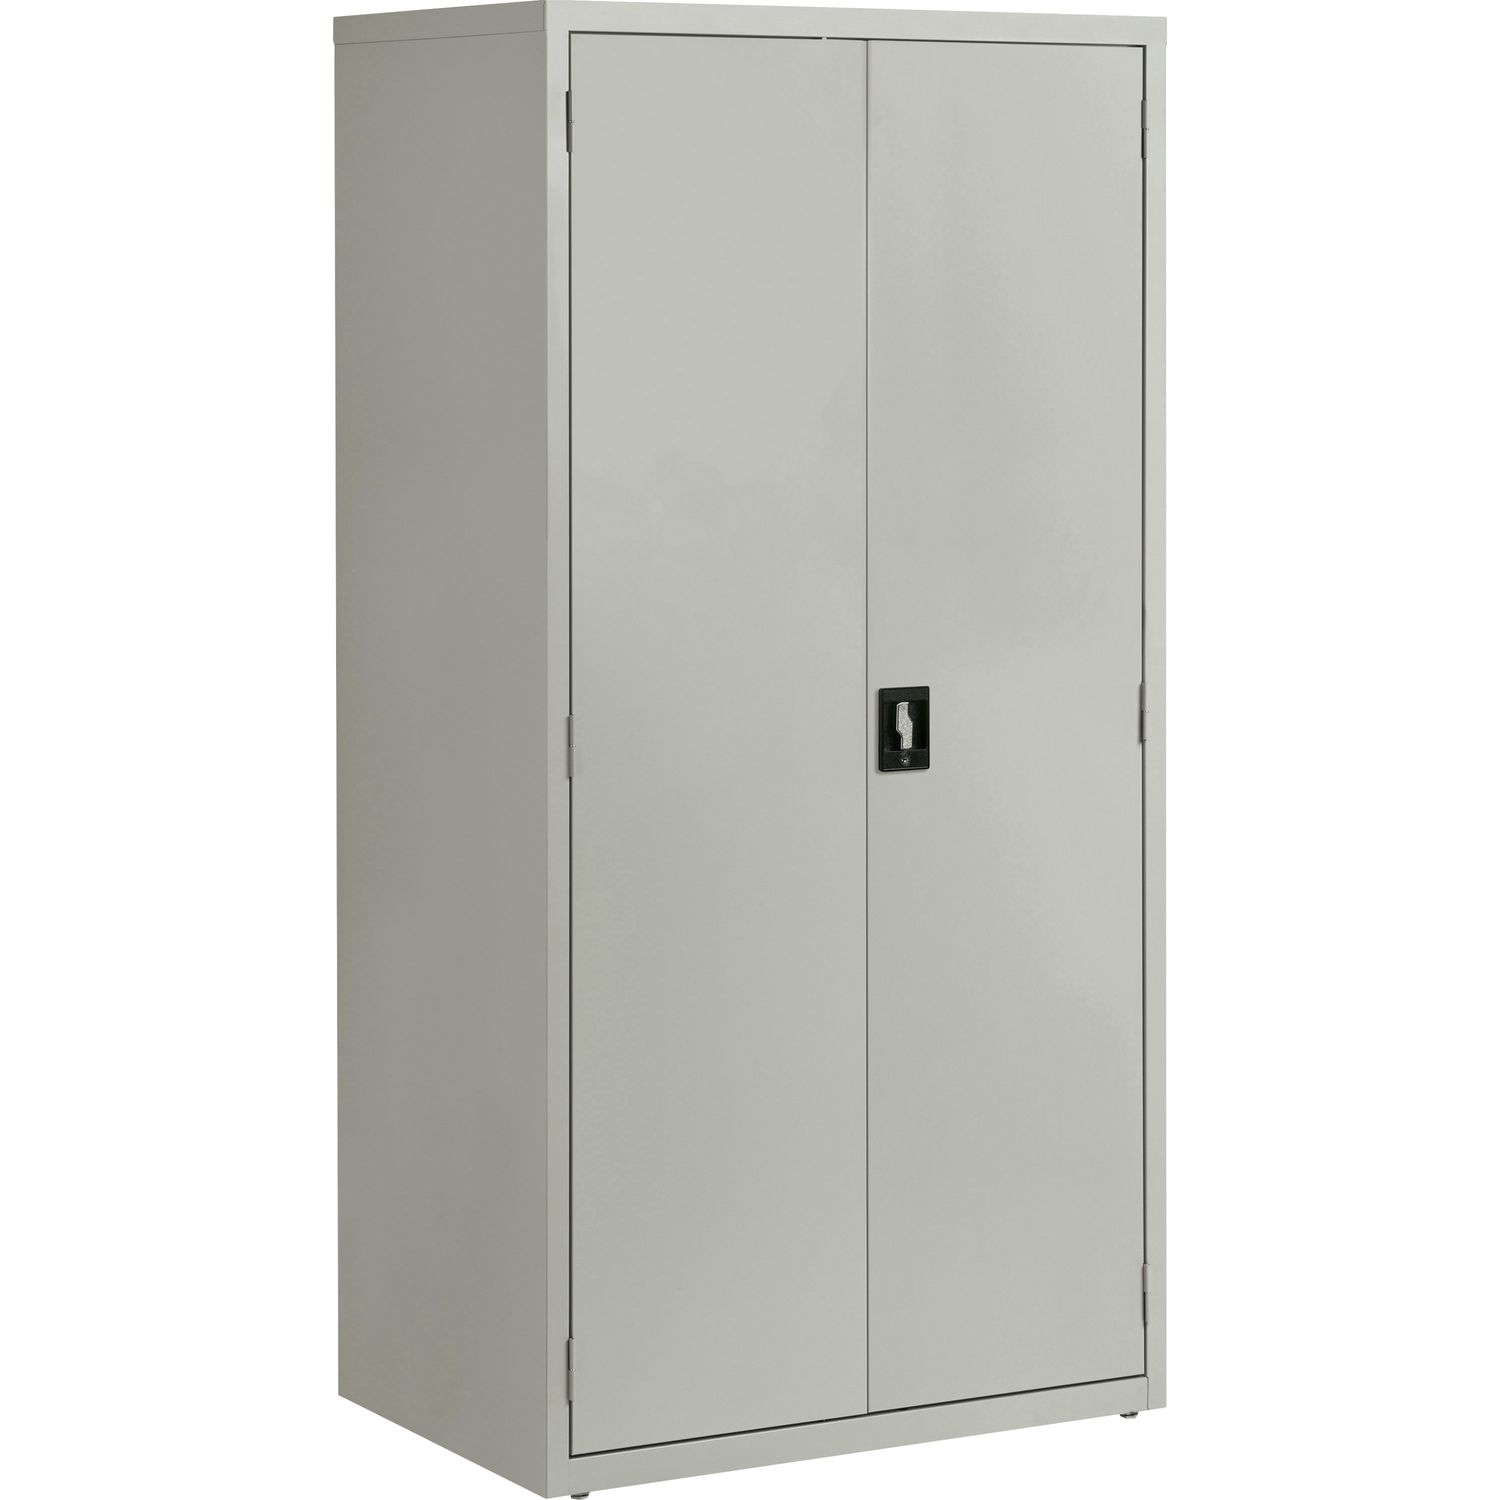 Storage Cabinet 24" x 36" x 72", 5 x Shelf(ves), Hinged Door(s), Sturdy, Recessed Locking Handle, Removable Lock, Durable, Storage Space, Light Gray, Powder Coated, Steel, Recycled